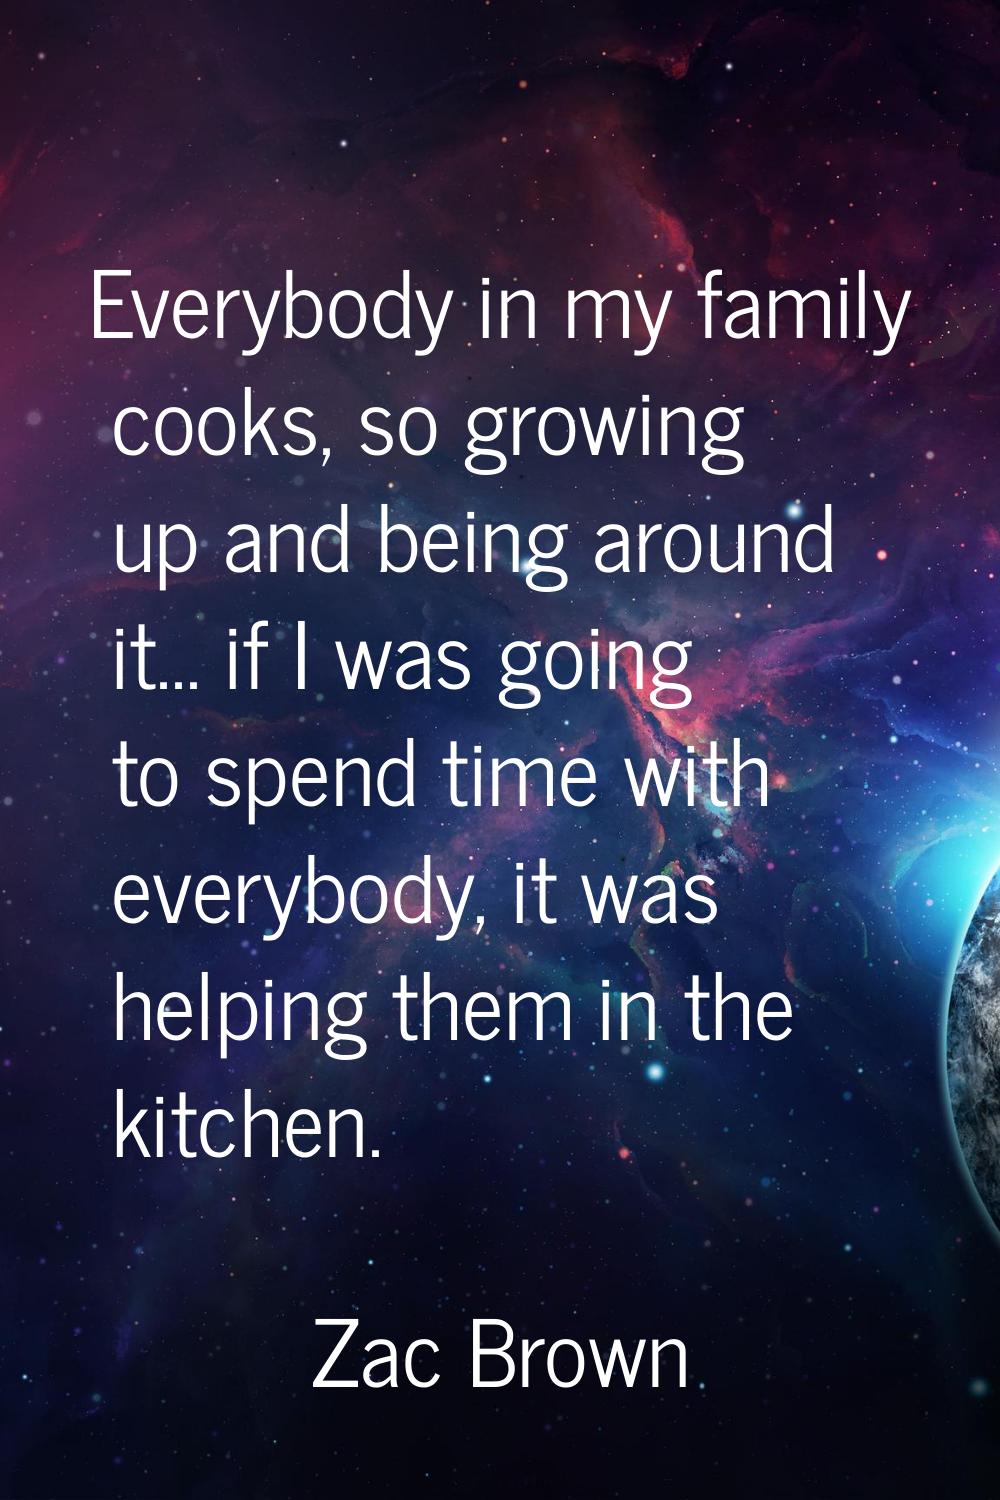 Everybody in my family cooks, so growing up and being around it... if I was going to spend time wit